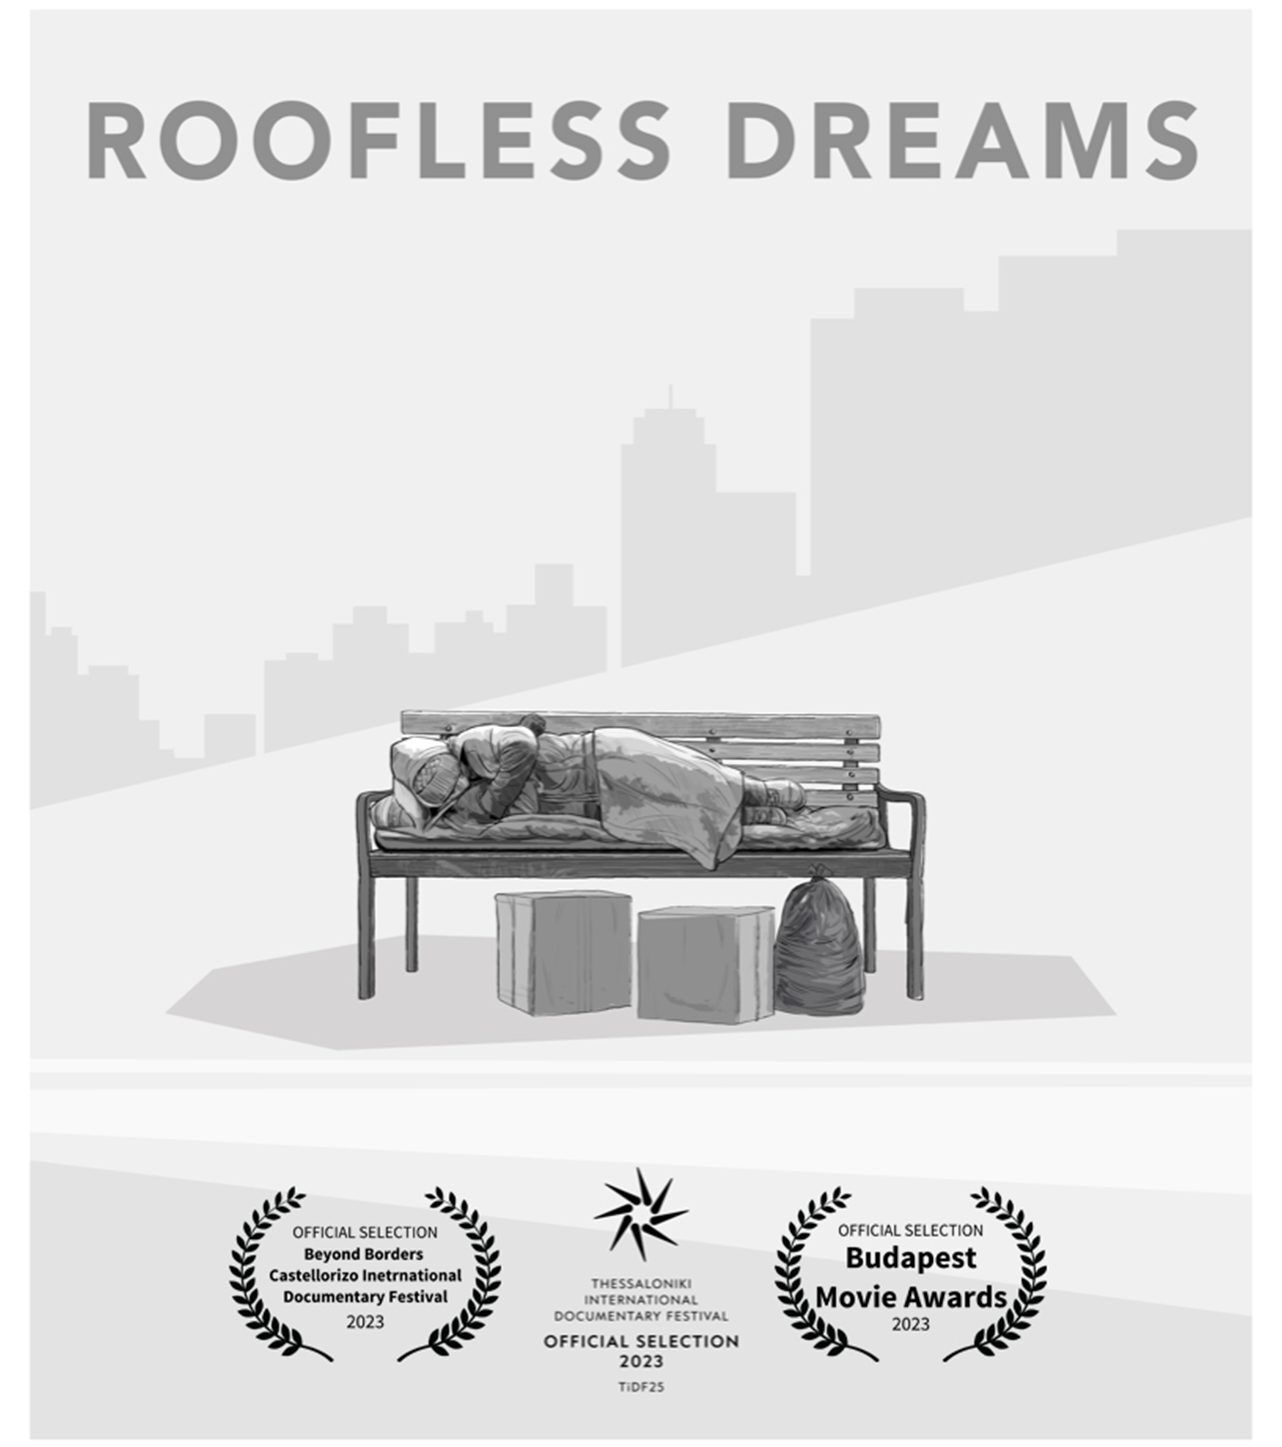 ROOFLESS DREAMS2 1282 X 1447 Image & Text